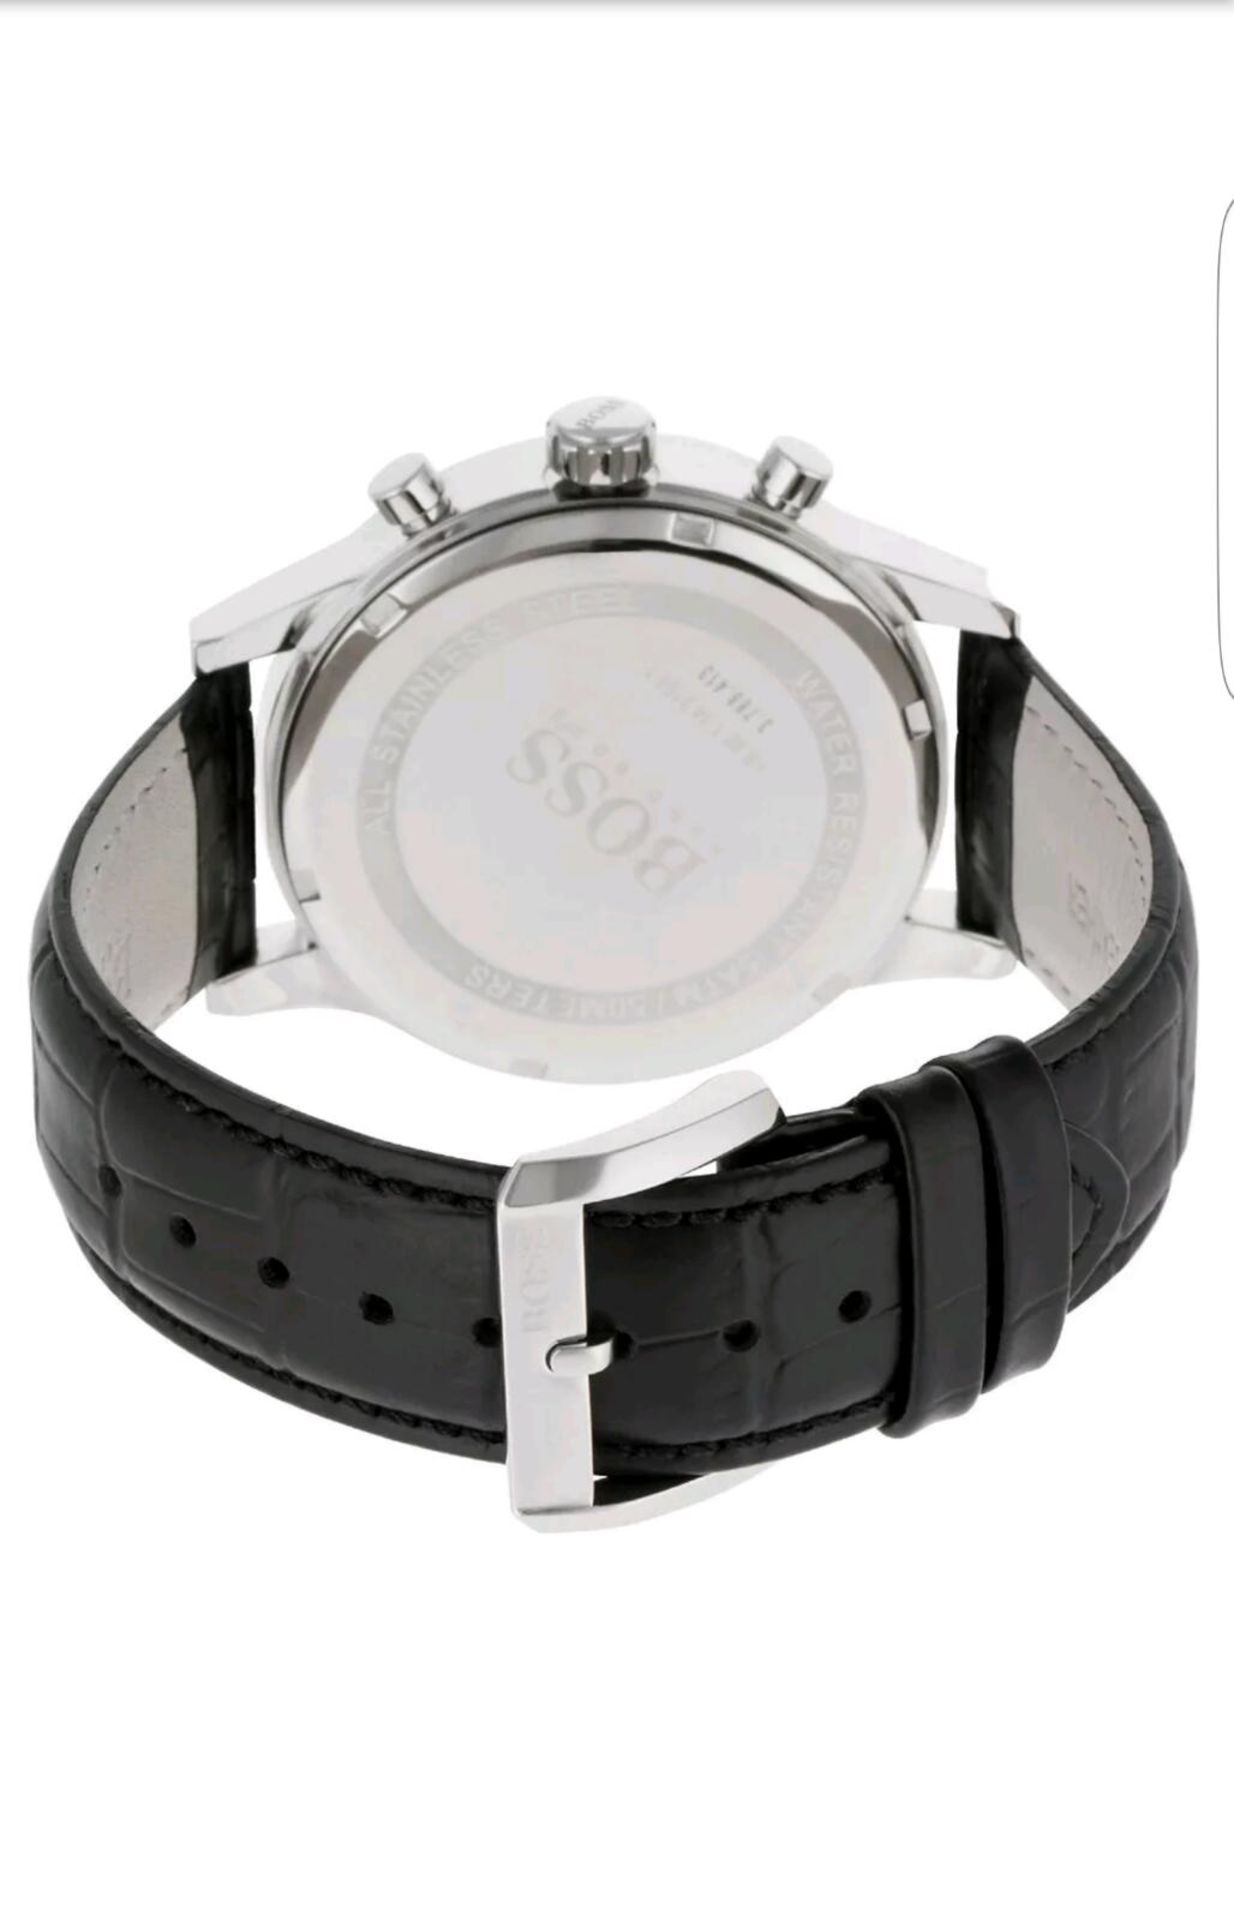 Brand new Hugo Boss HB1512448, Gents designer watch - complete with original packaging and manual - Image 2 of 2